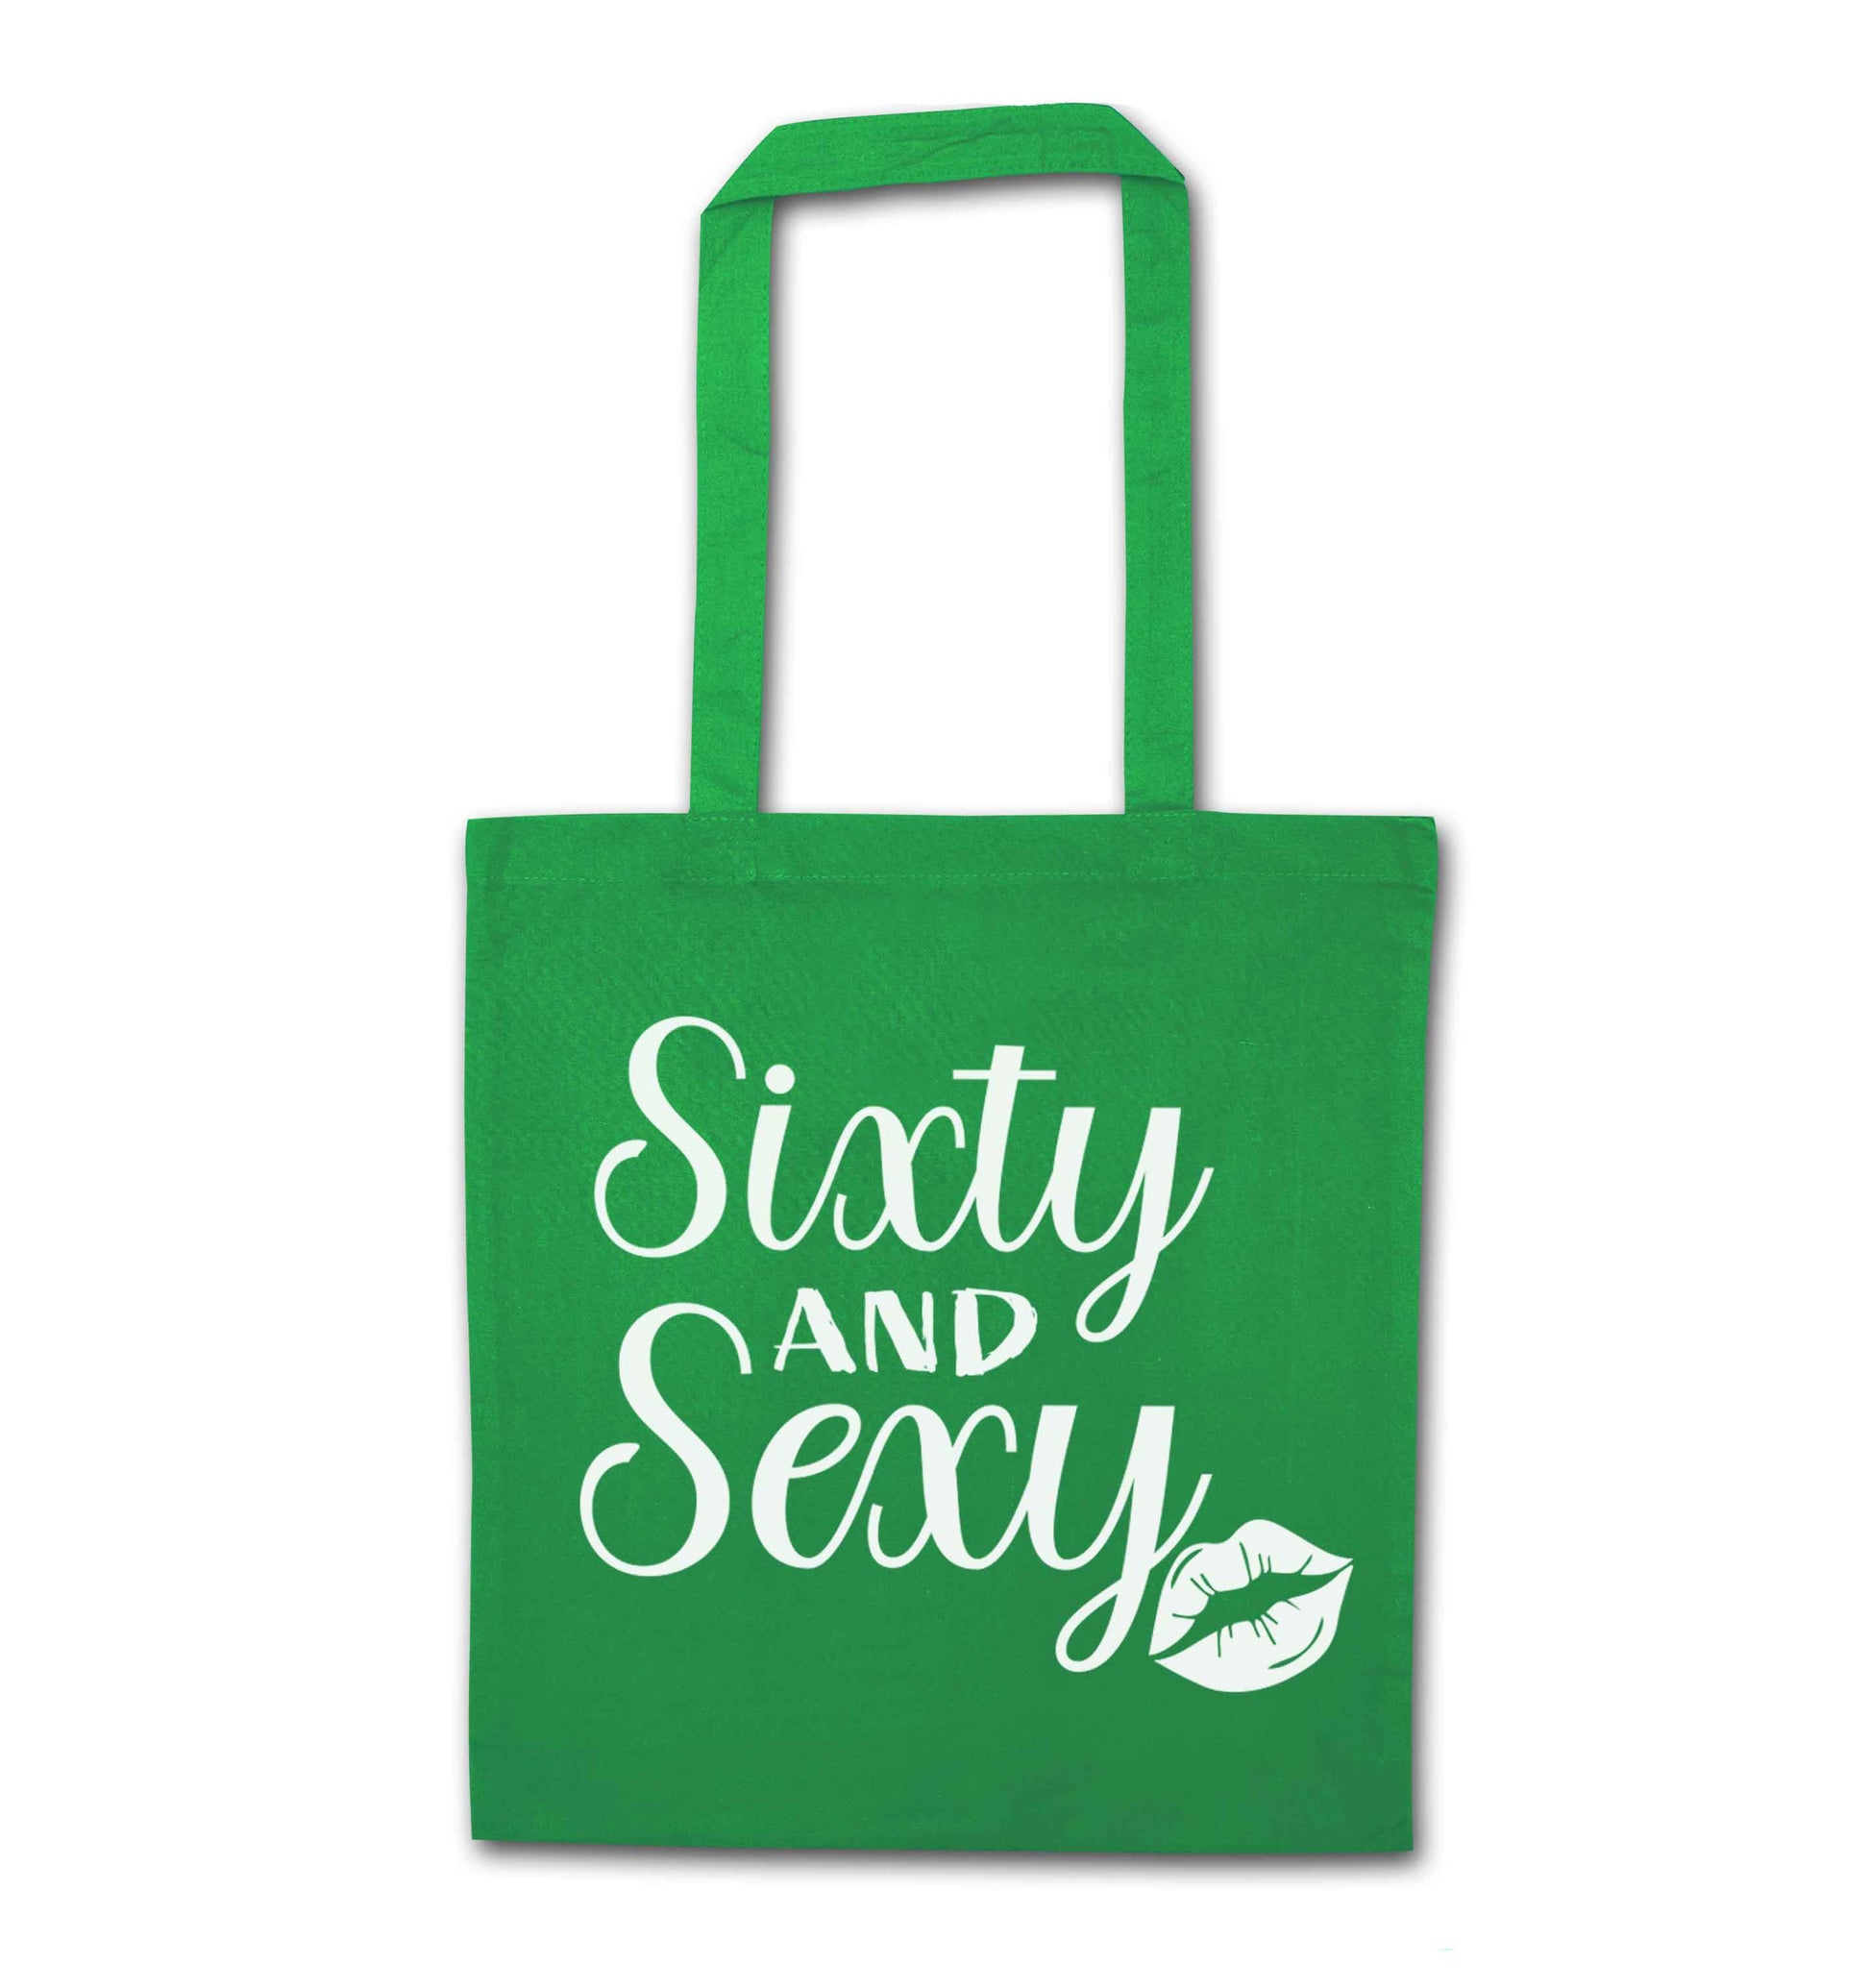 Sixty and sexy green tote bag